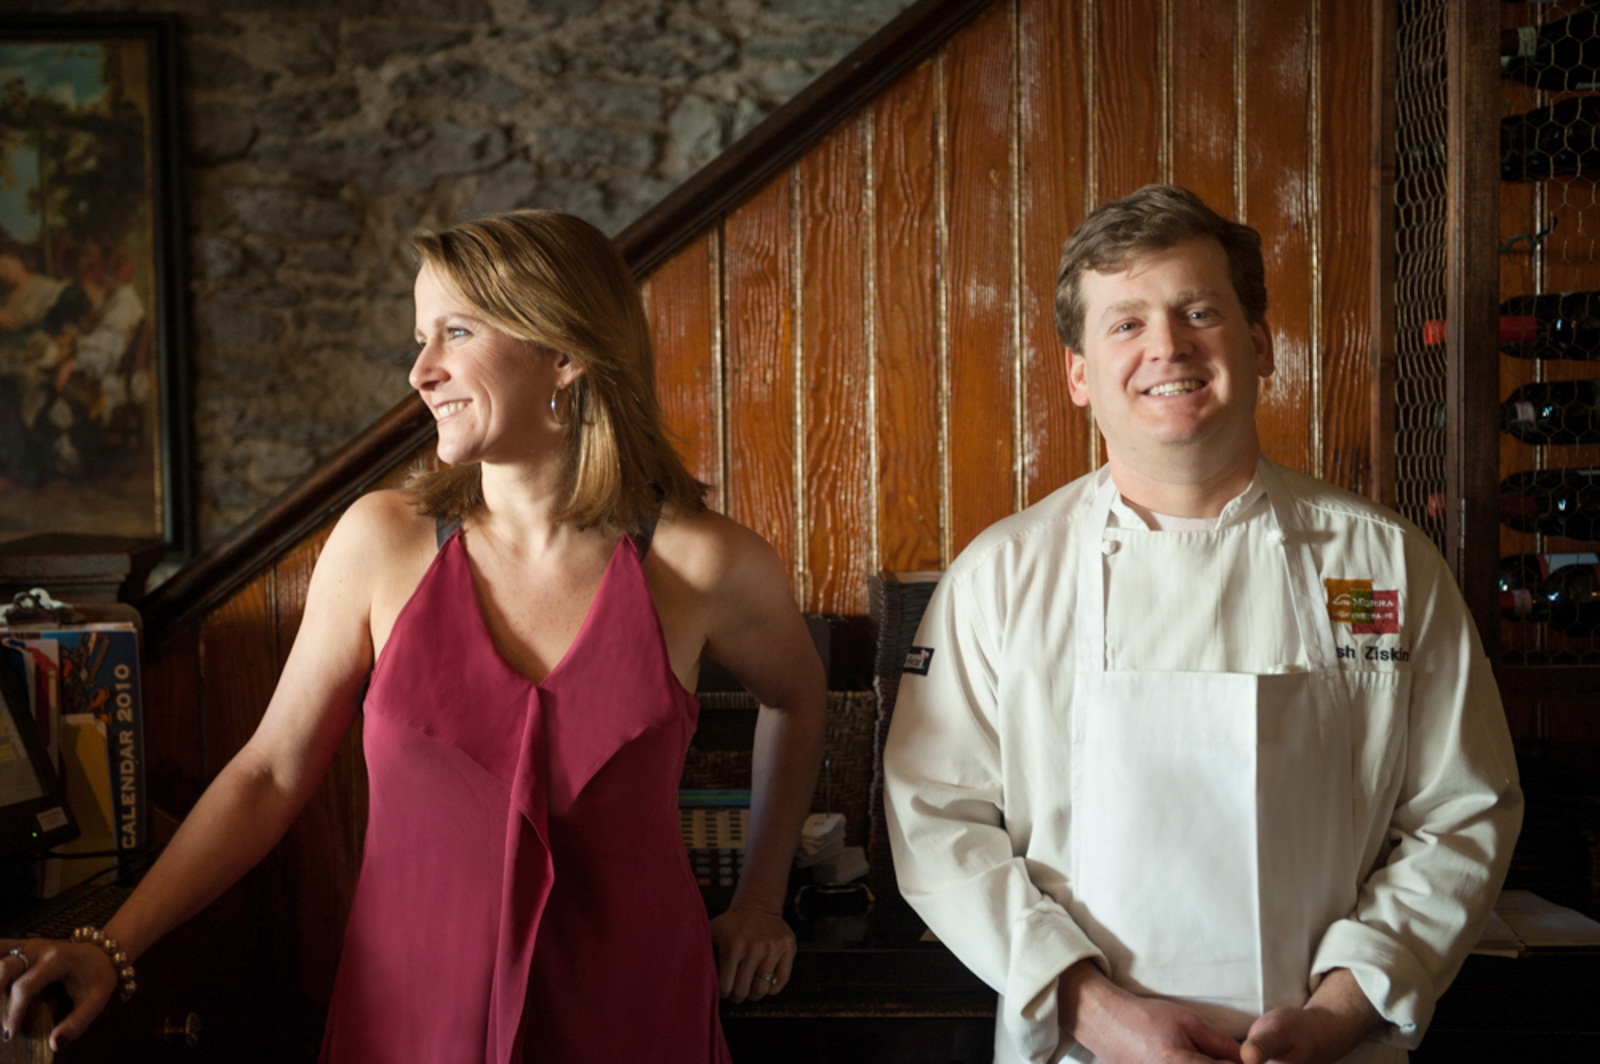 Portrait of a woman in a dress looking to the side and a man with a chef uniform smiling